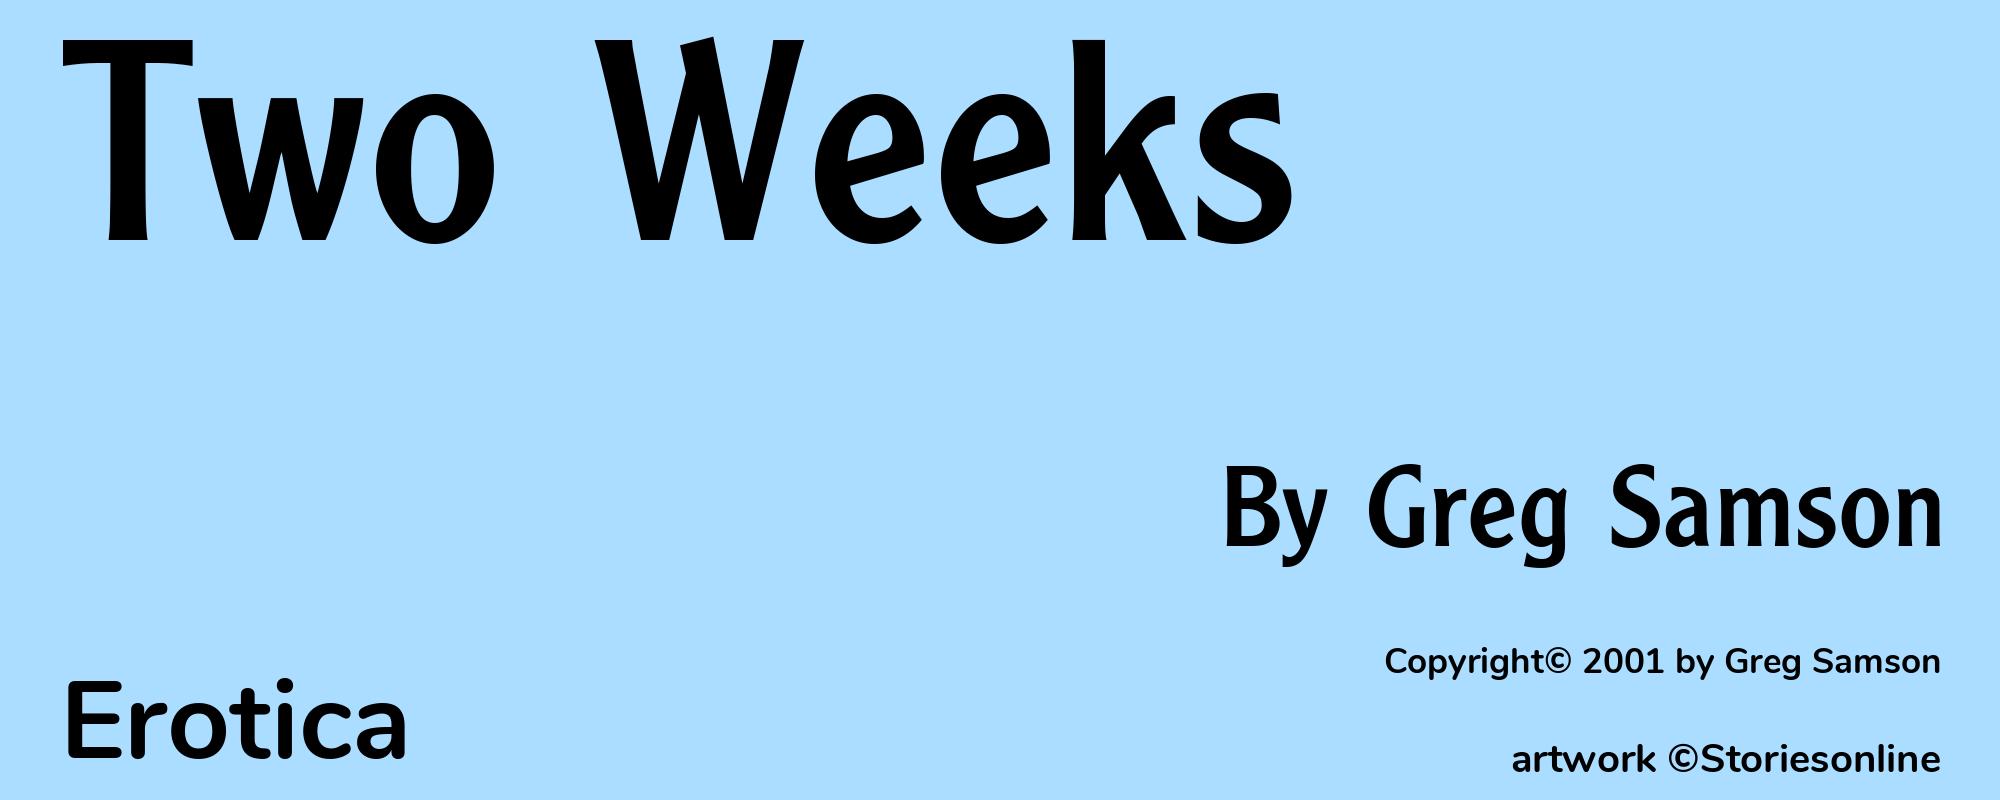 Two Weeks - Cover